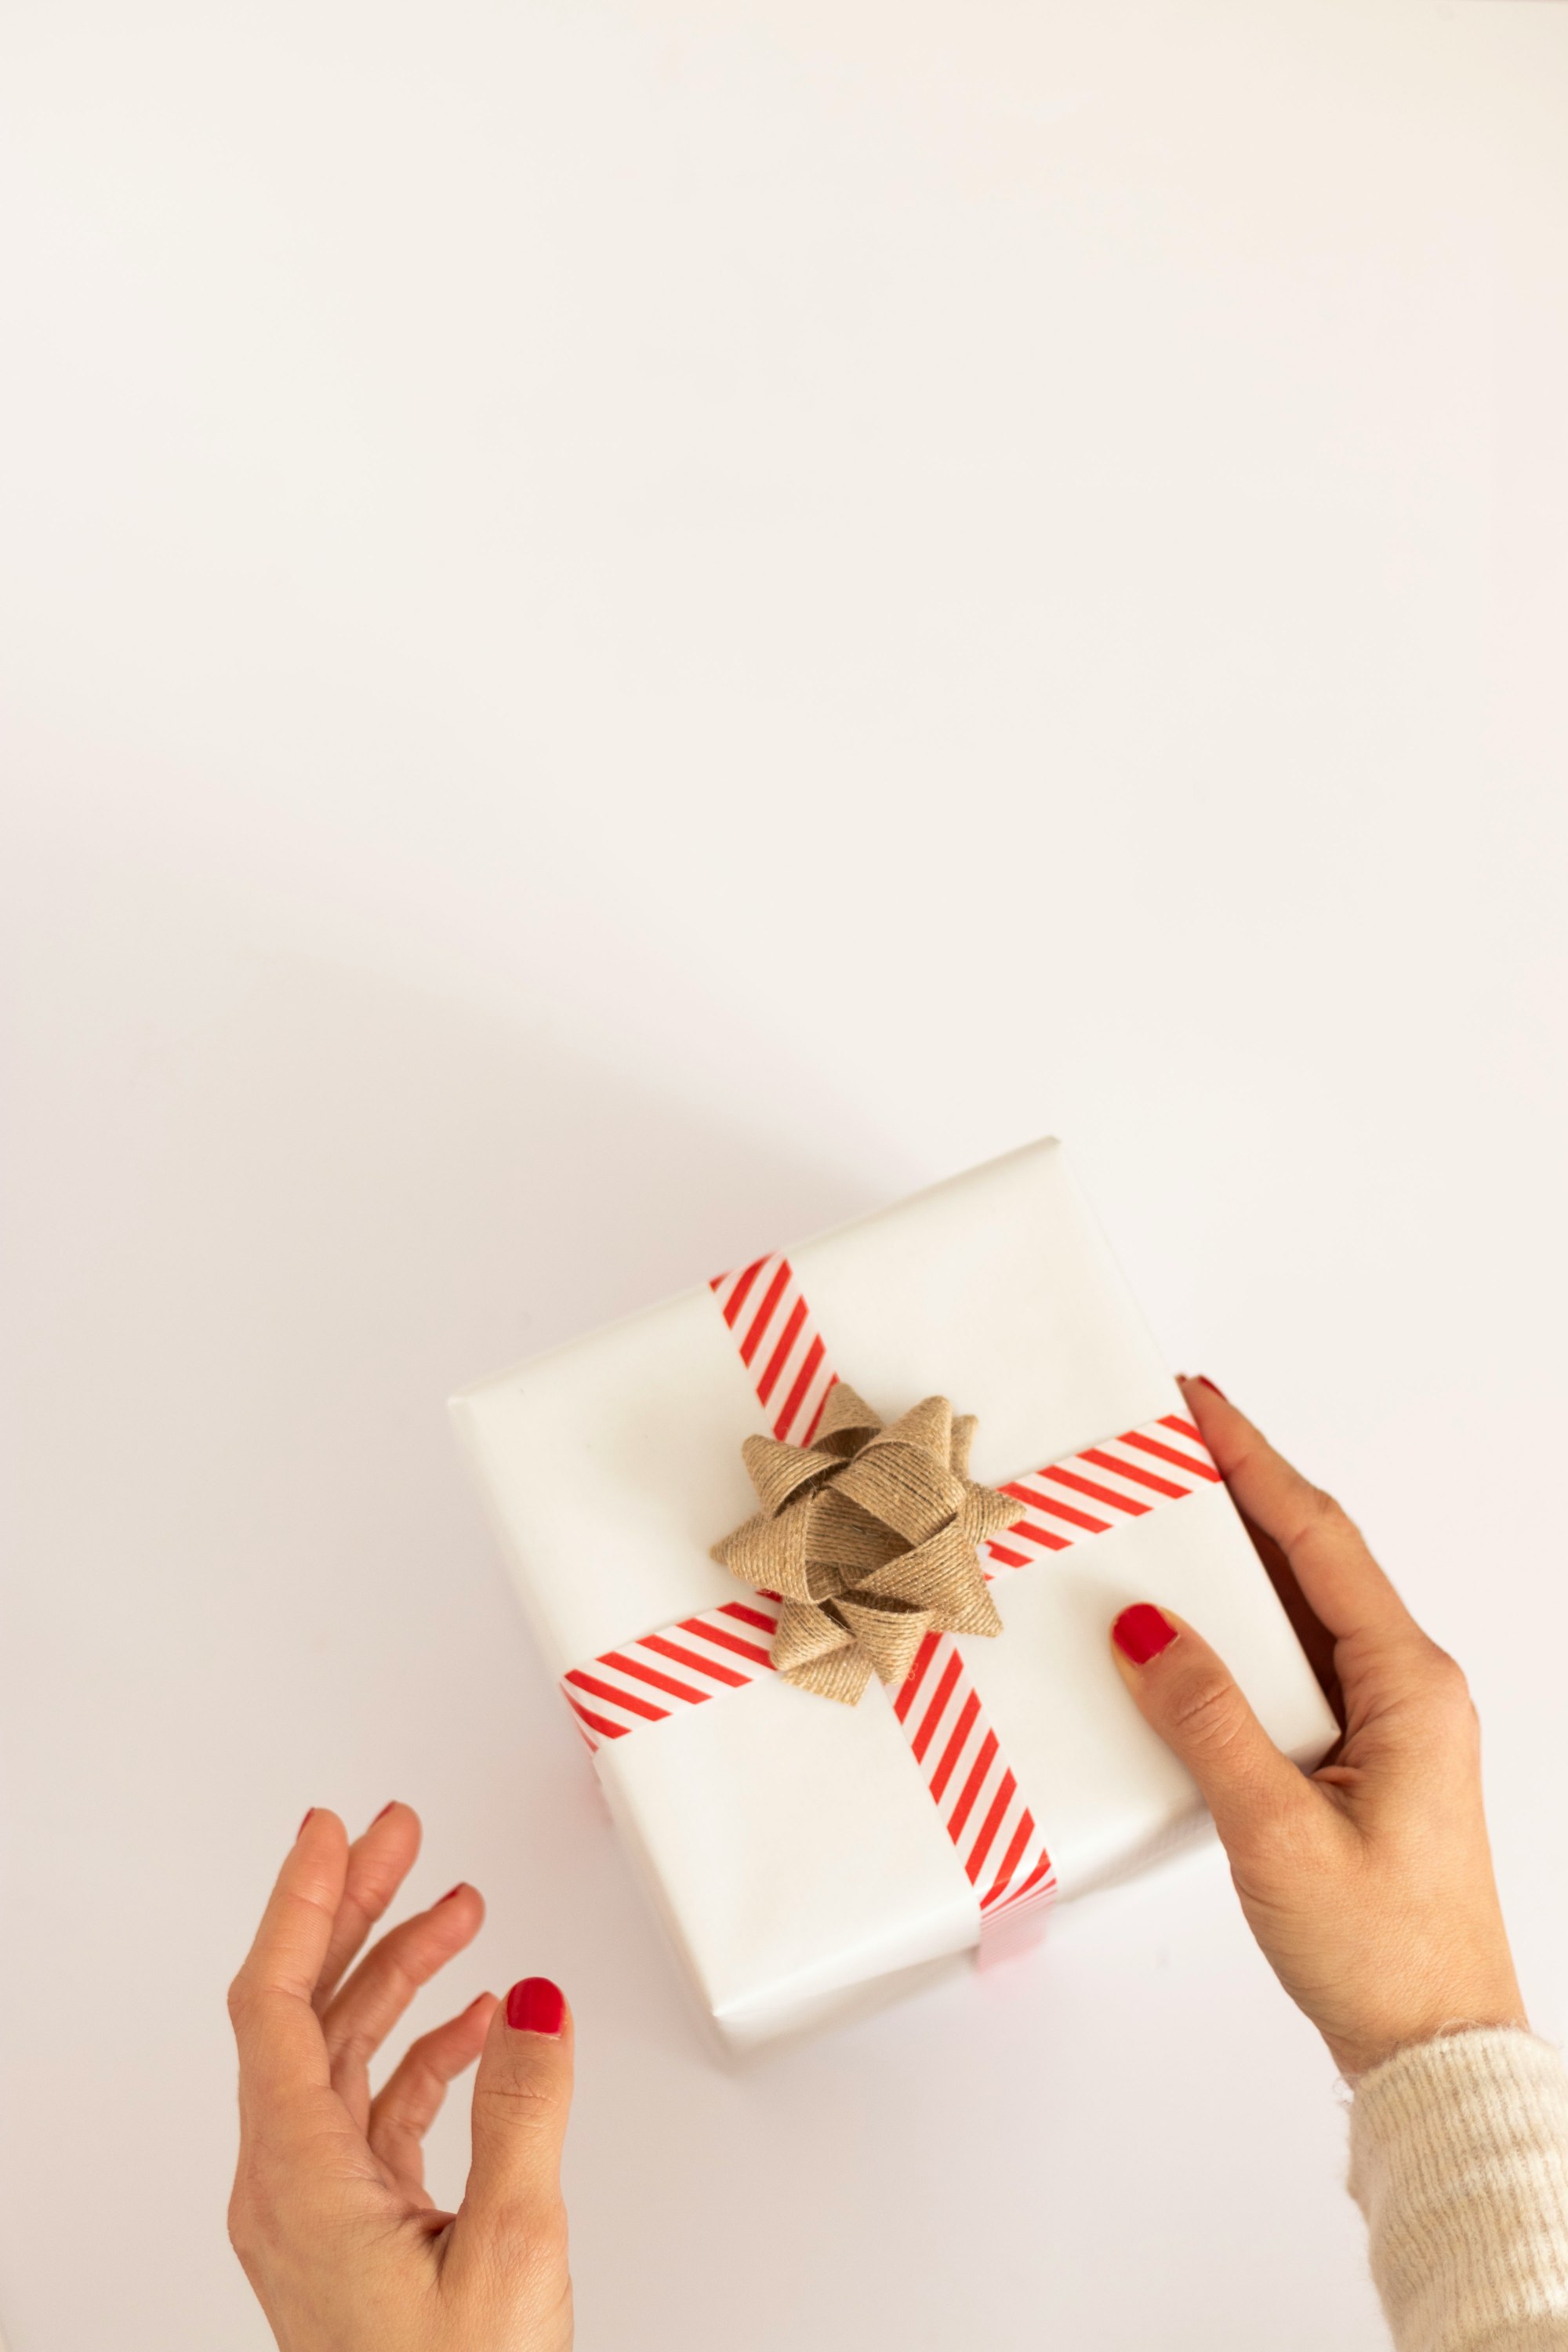 Why Your Business Should Switch to Eco-Friendly Client Gifts